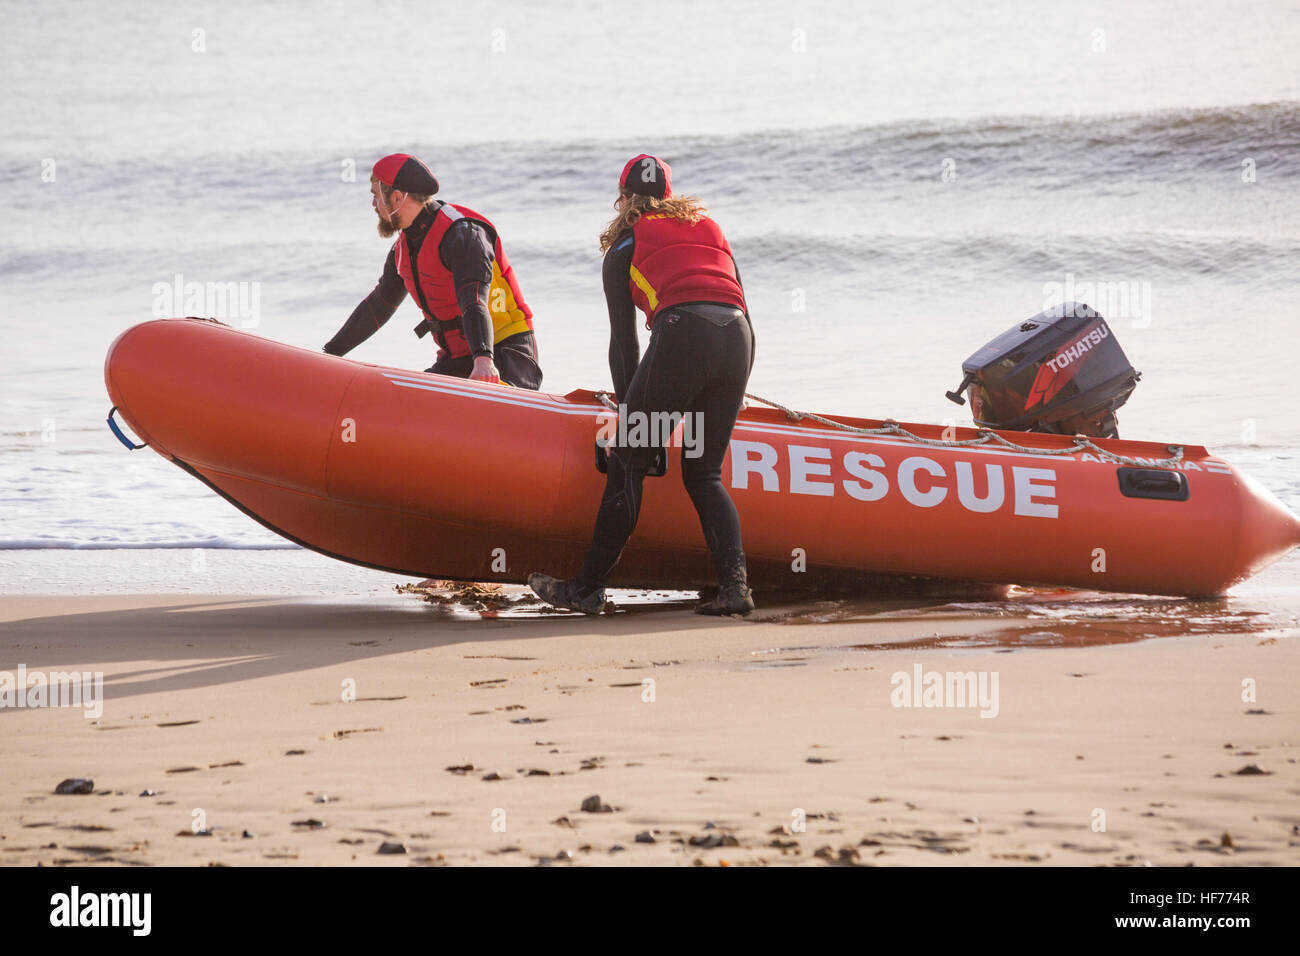 Bournemouth Lifeguard Corps give a demonstration of their lifesaving skills in the sea at Durley Chine beach, Bournemouth, UK on Boxing Day Stock Photo